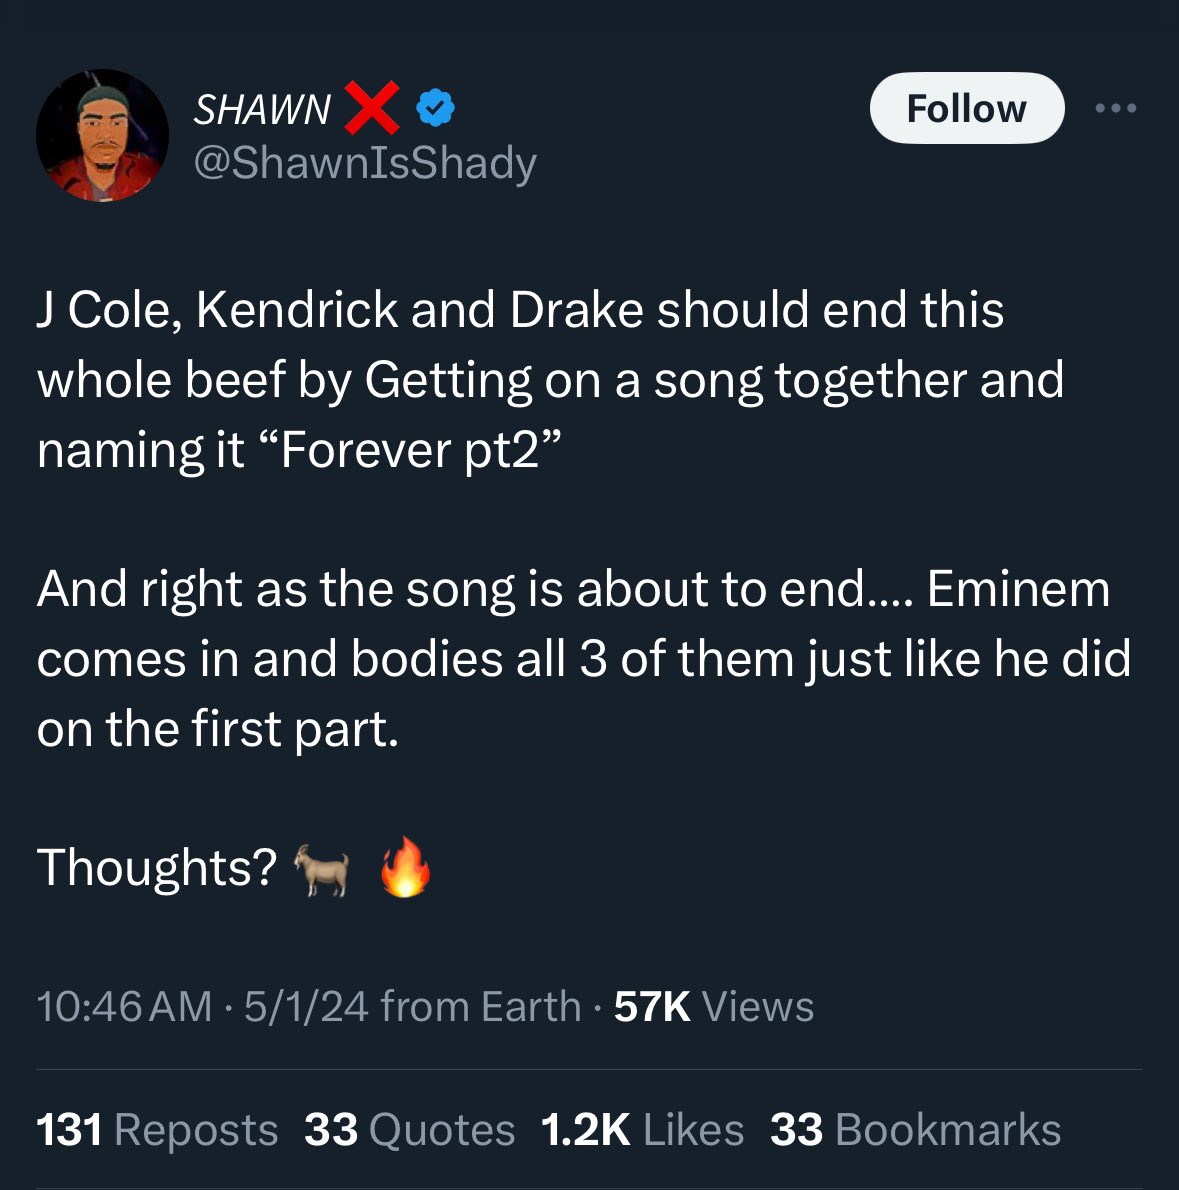 Drake: last name coolguy, first name awesomest Kendrick: my dick lean like the tower of pisa Cole: I love you guys let’s not fight i’m sorry Eminem: scrape your face with a razor, hit you in the head with the claw part of a hammer, your head explodes like a fucking watermelon